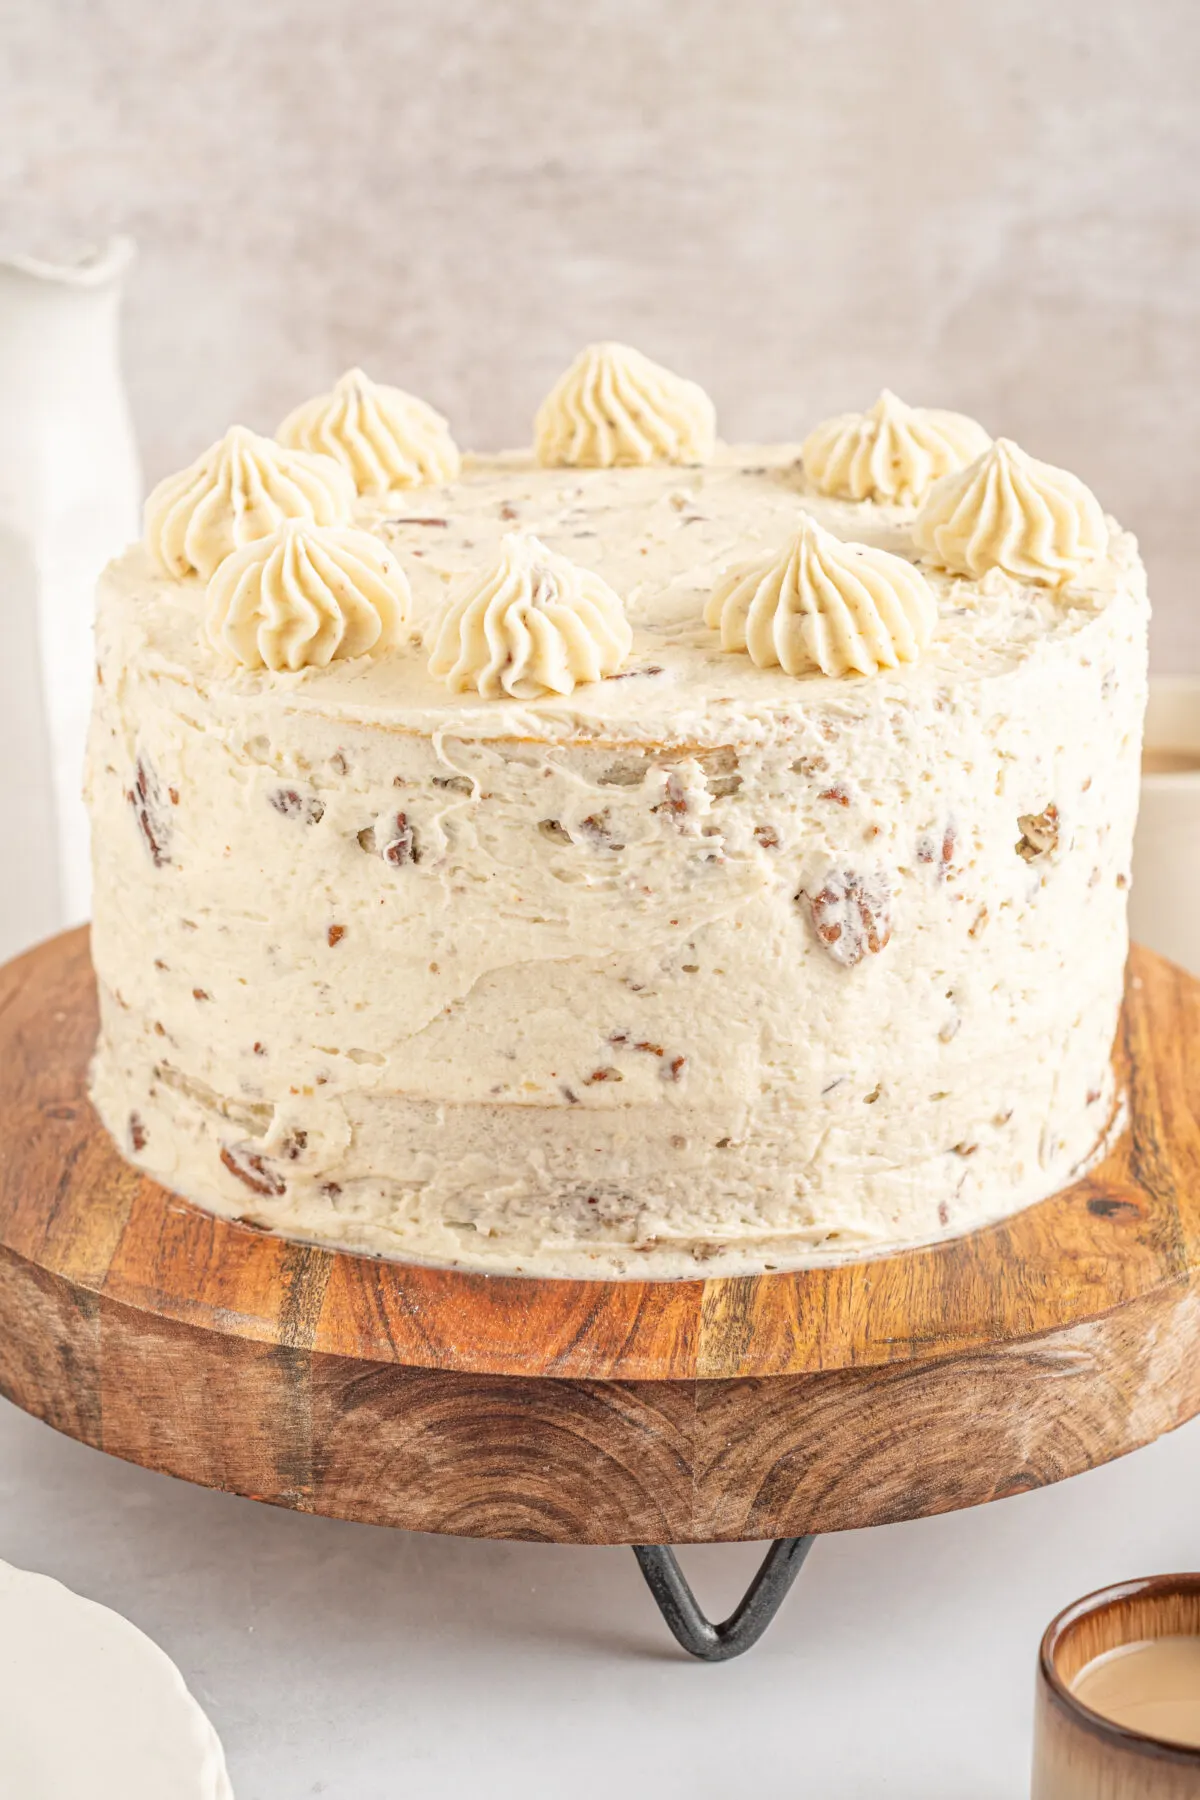 Loaded with buttery pecans, this delicious and moist butter pecan cake is layered with a rich cream cheese frosting. This cake is the best!